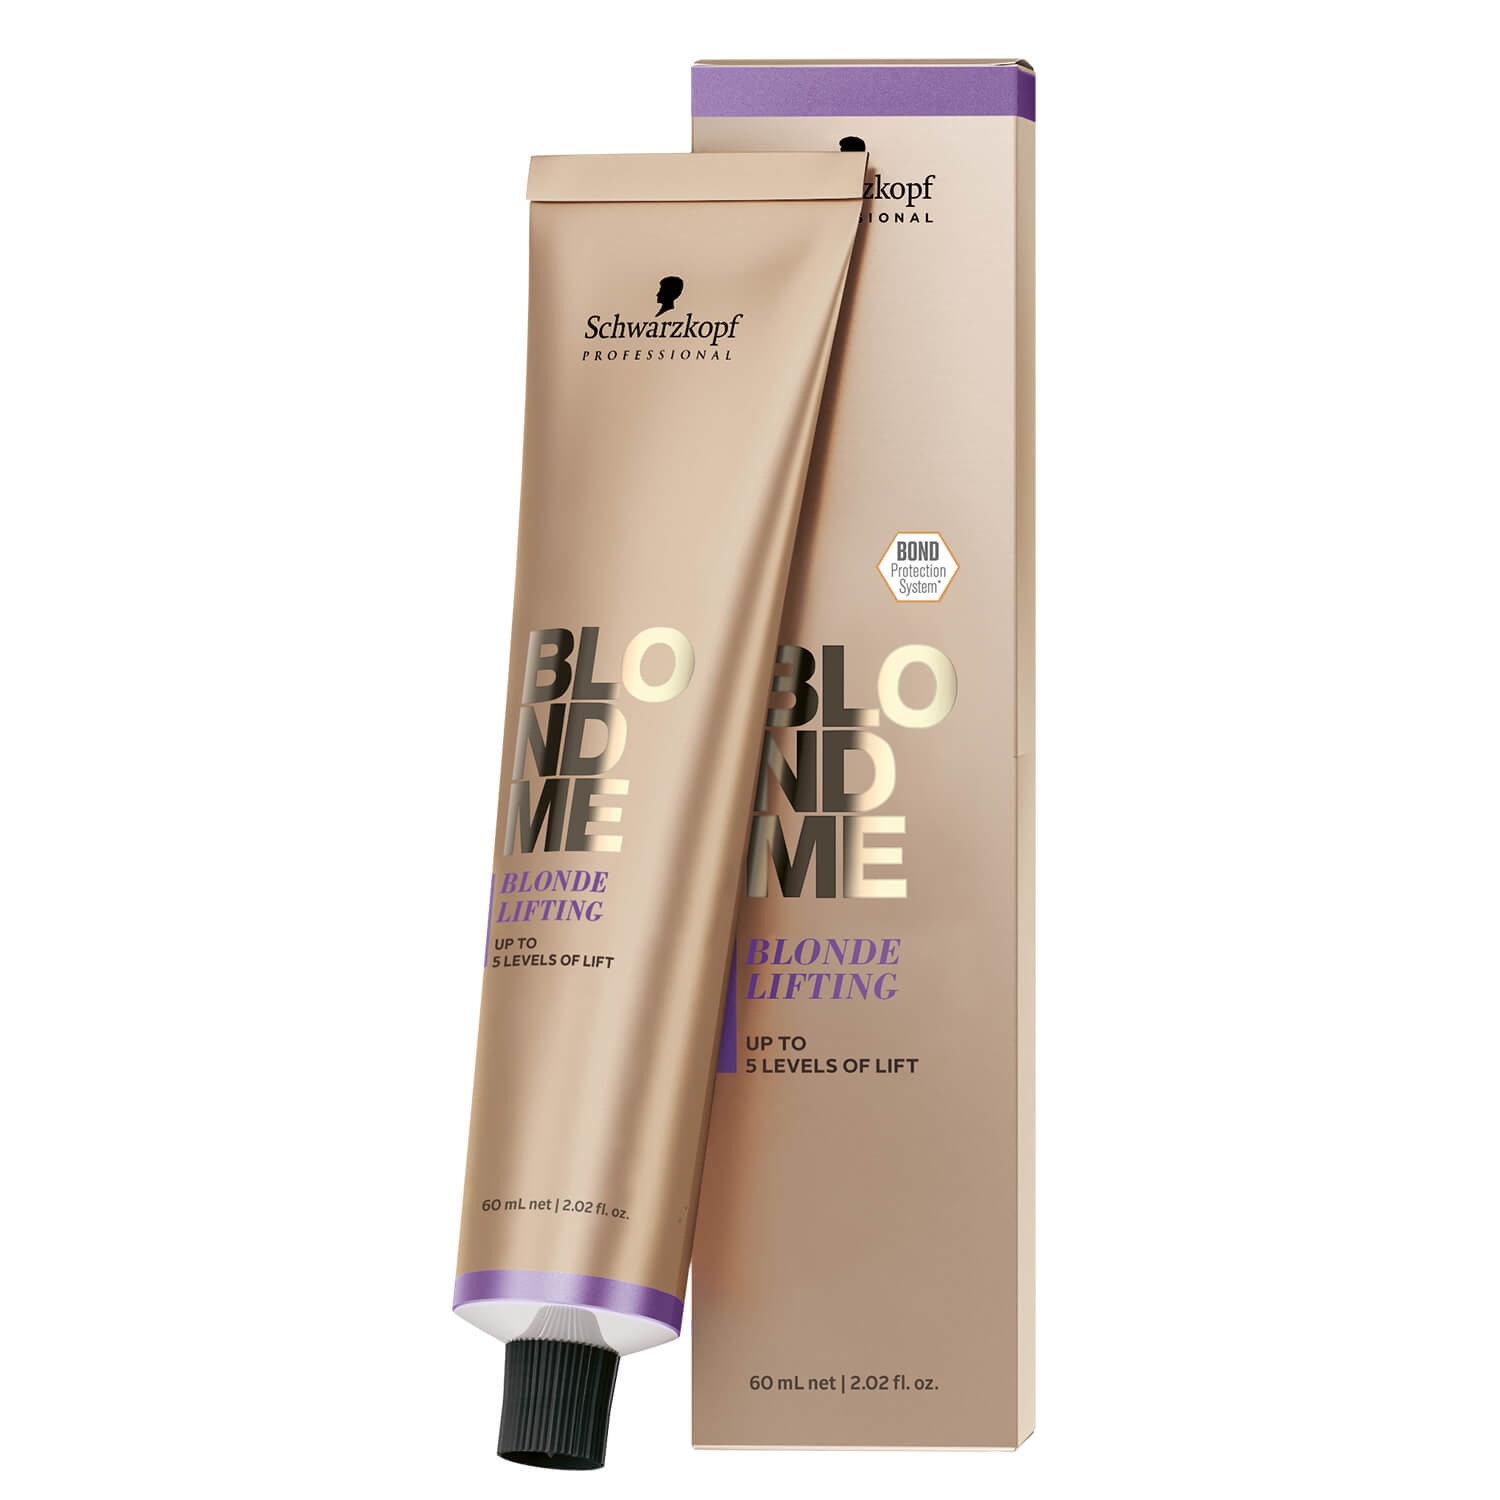 Product image from Blondme - Blonde Lifting Sand